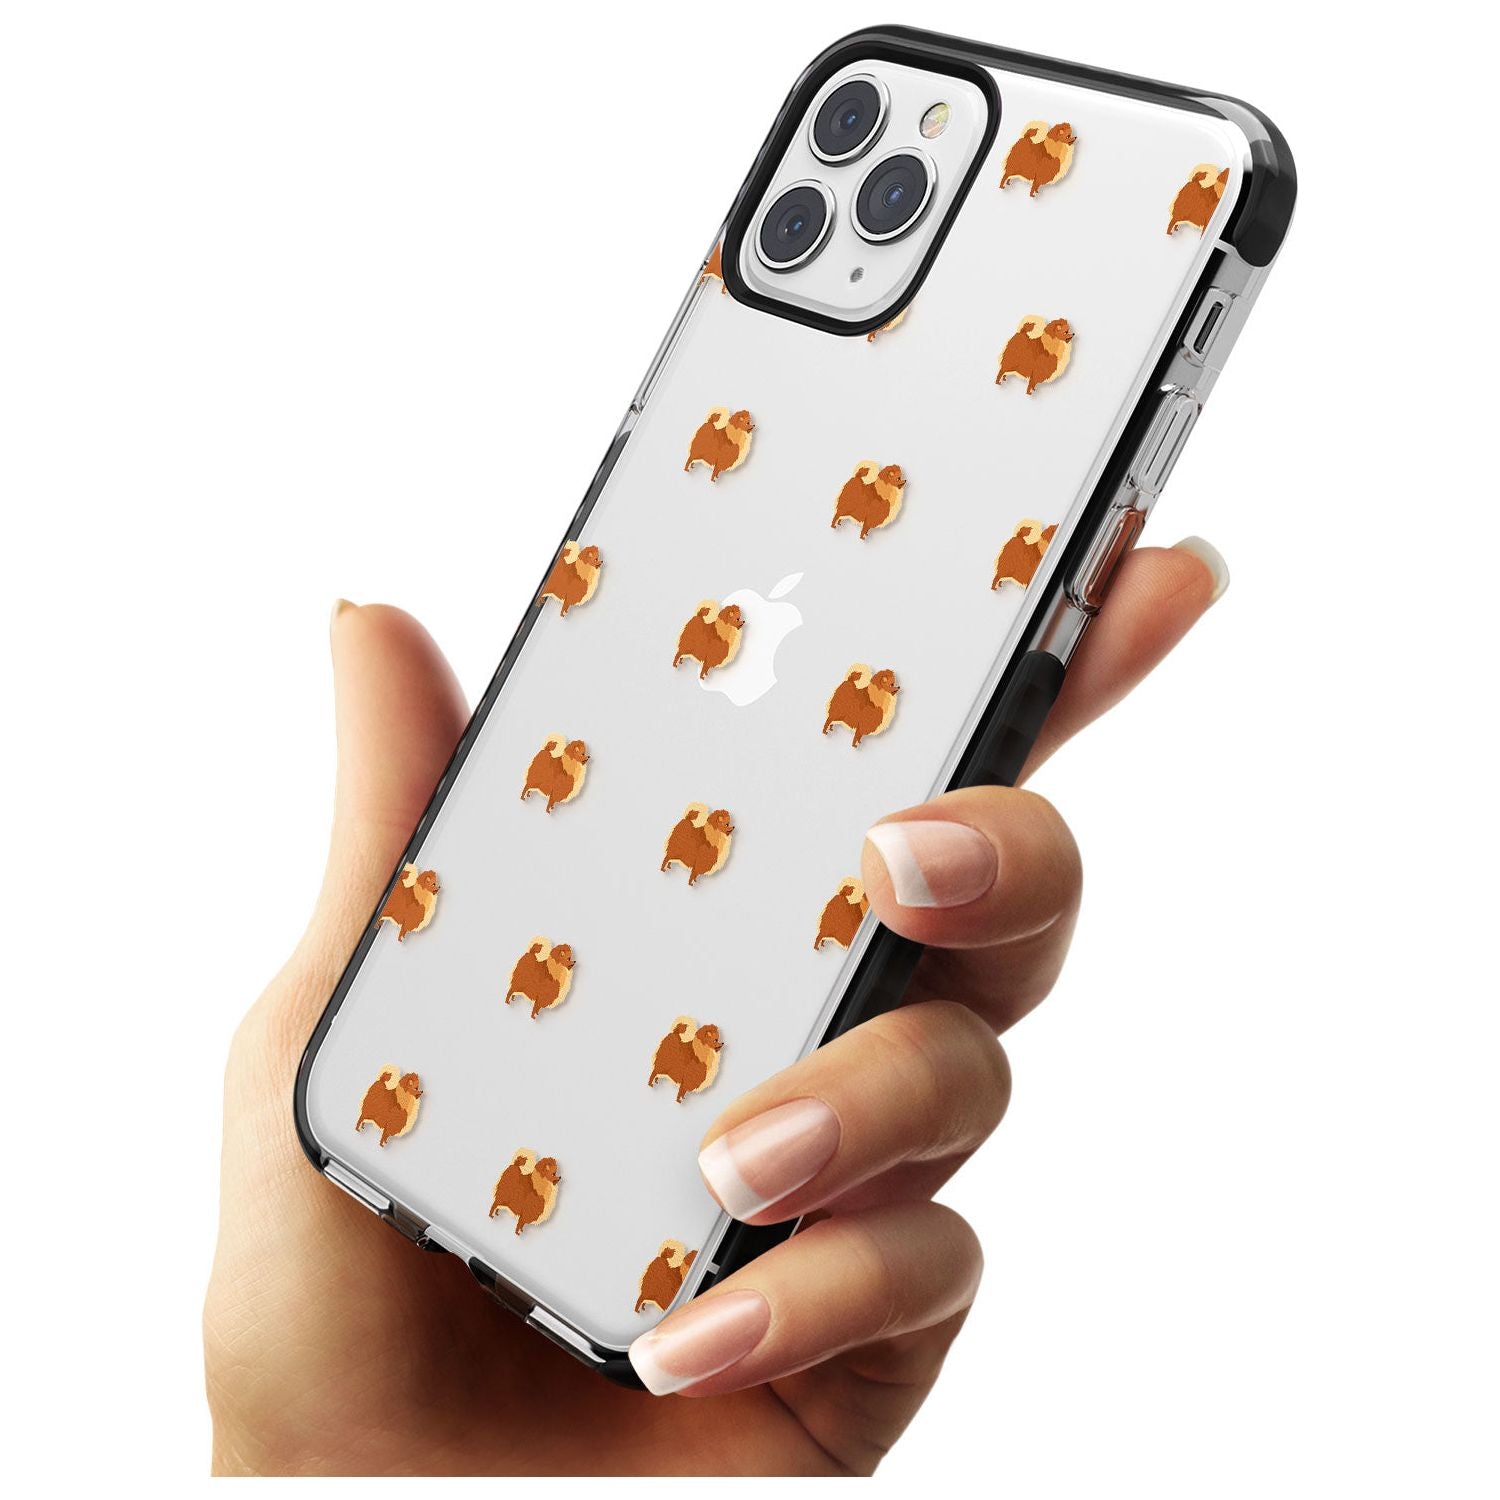 Pomeranian Dog Pattern Clear Black Impact Phone Case for iPhone 11 Pro Max